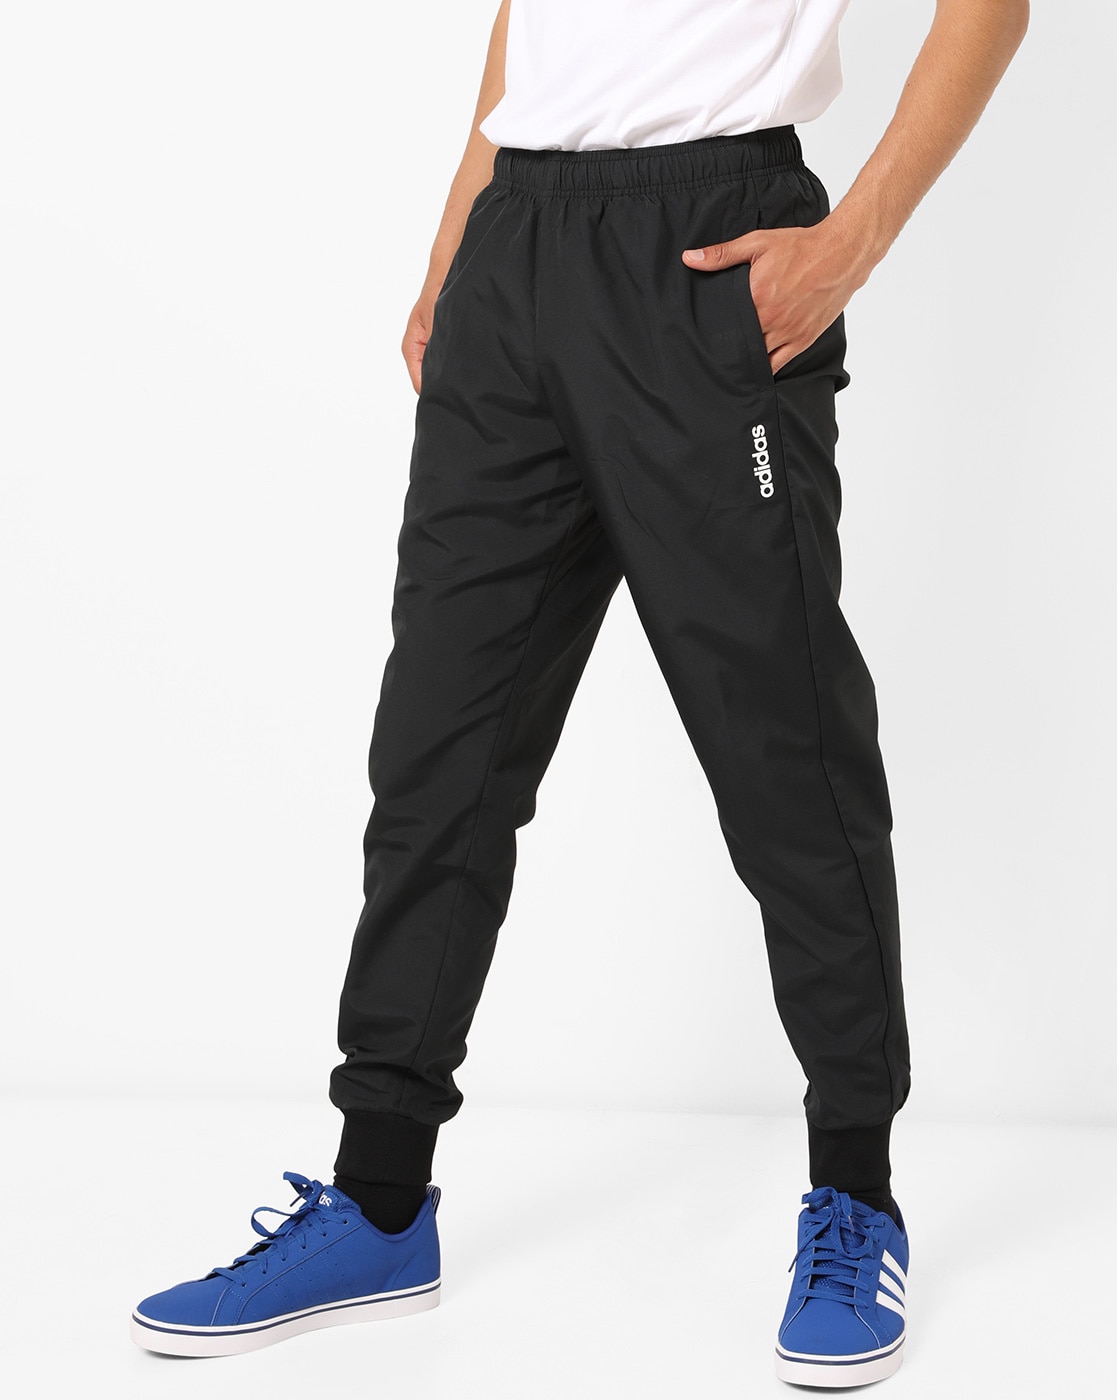 Buy Black Track Pants for Men by ADIDAS 